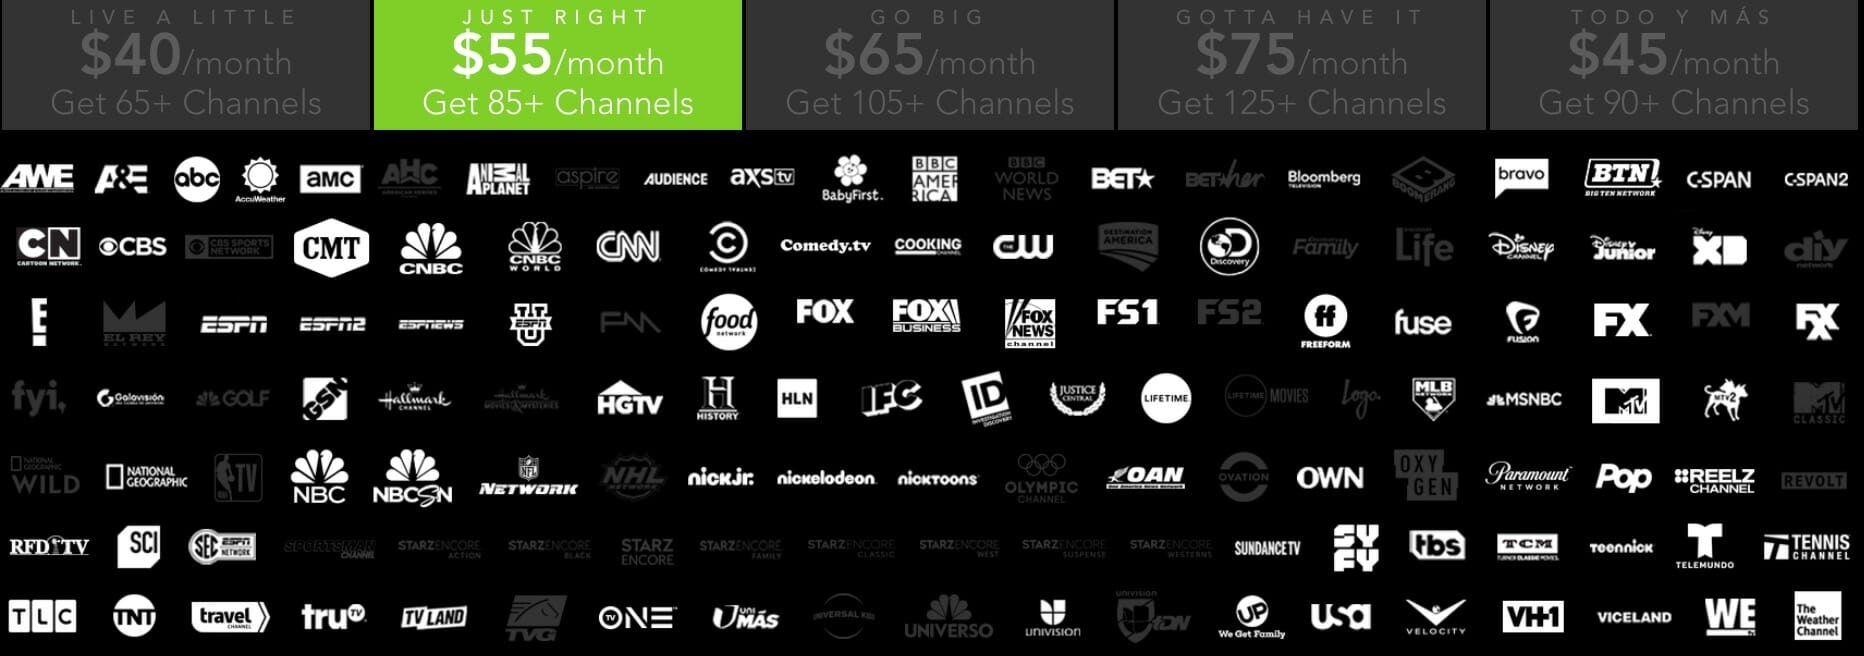 DirecTV Now Channels The Complete DirecTV Now Channel Lineup